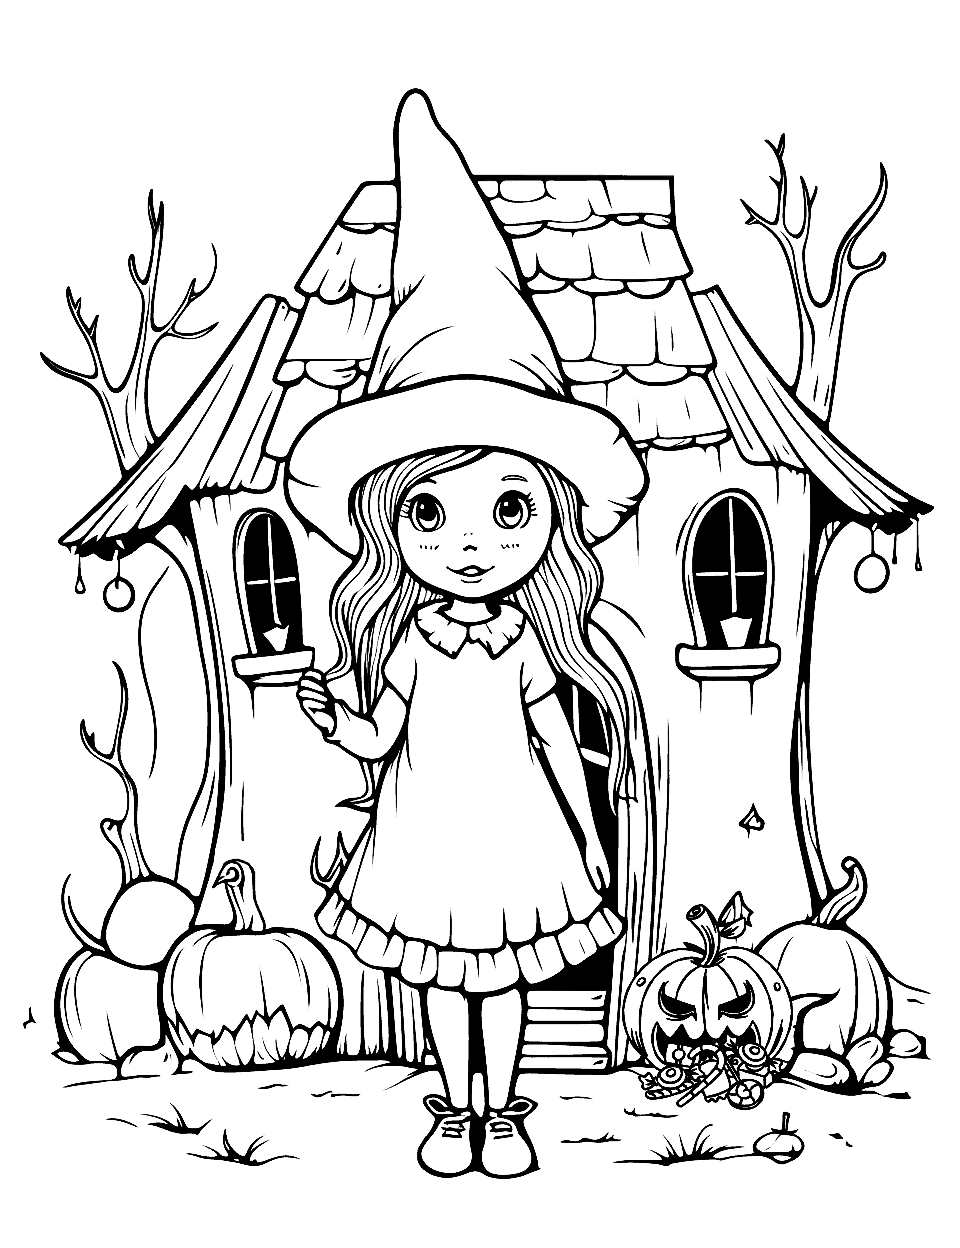 Witch's Forest Cabin Witch Coloring Page - A witch outside her cozy cabin in the woods.